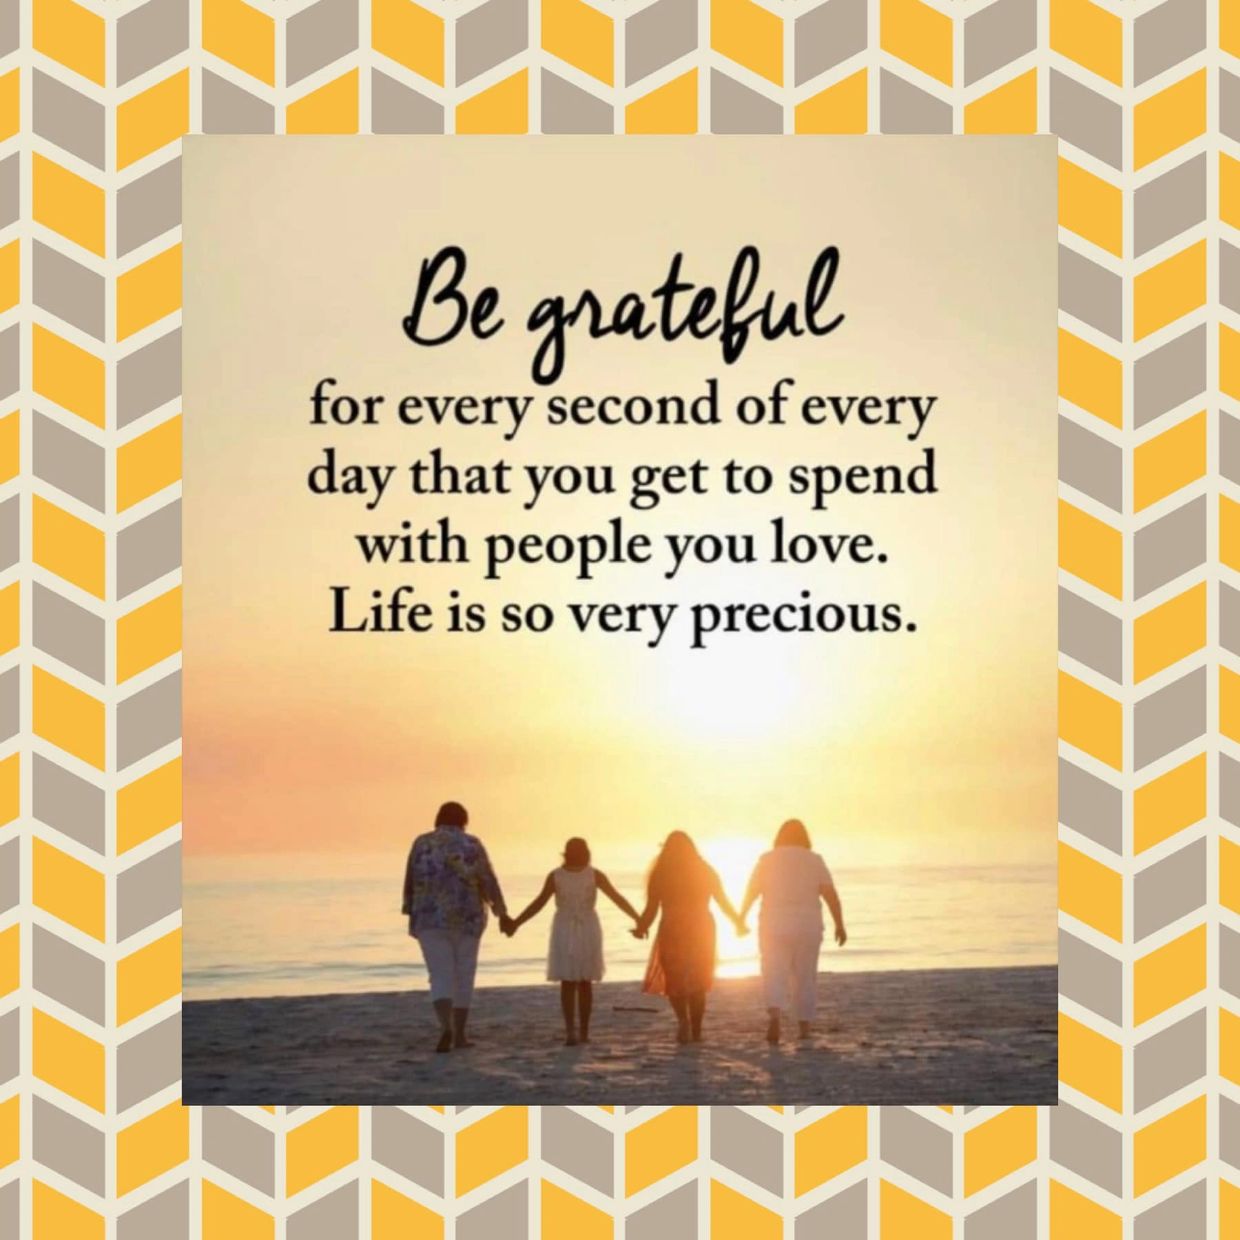 Be grateful for every second of every day that you get to spend with people you love.